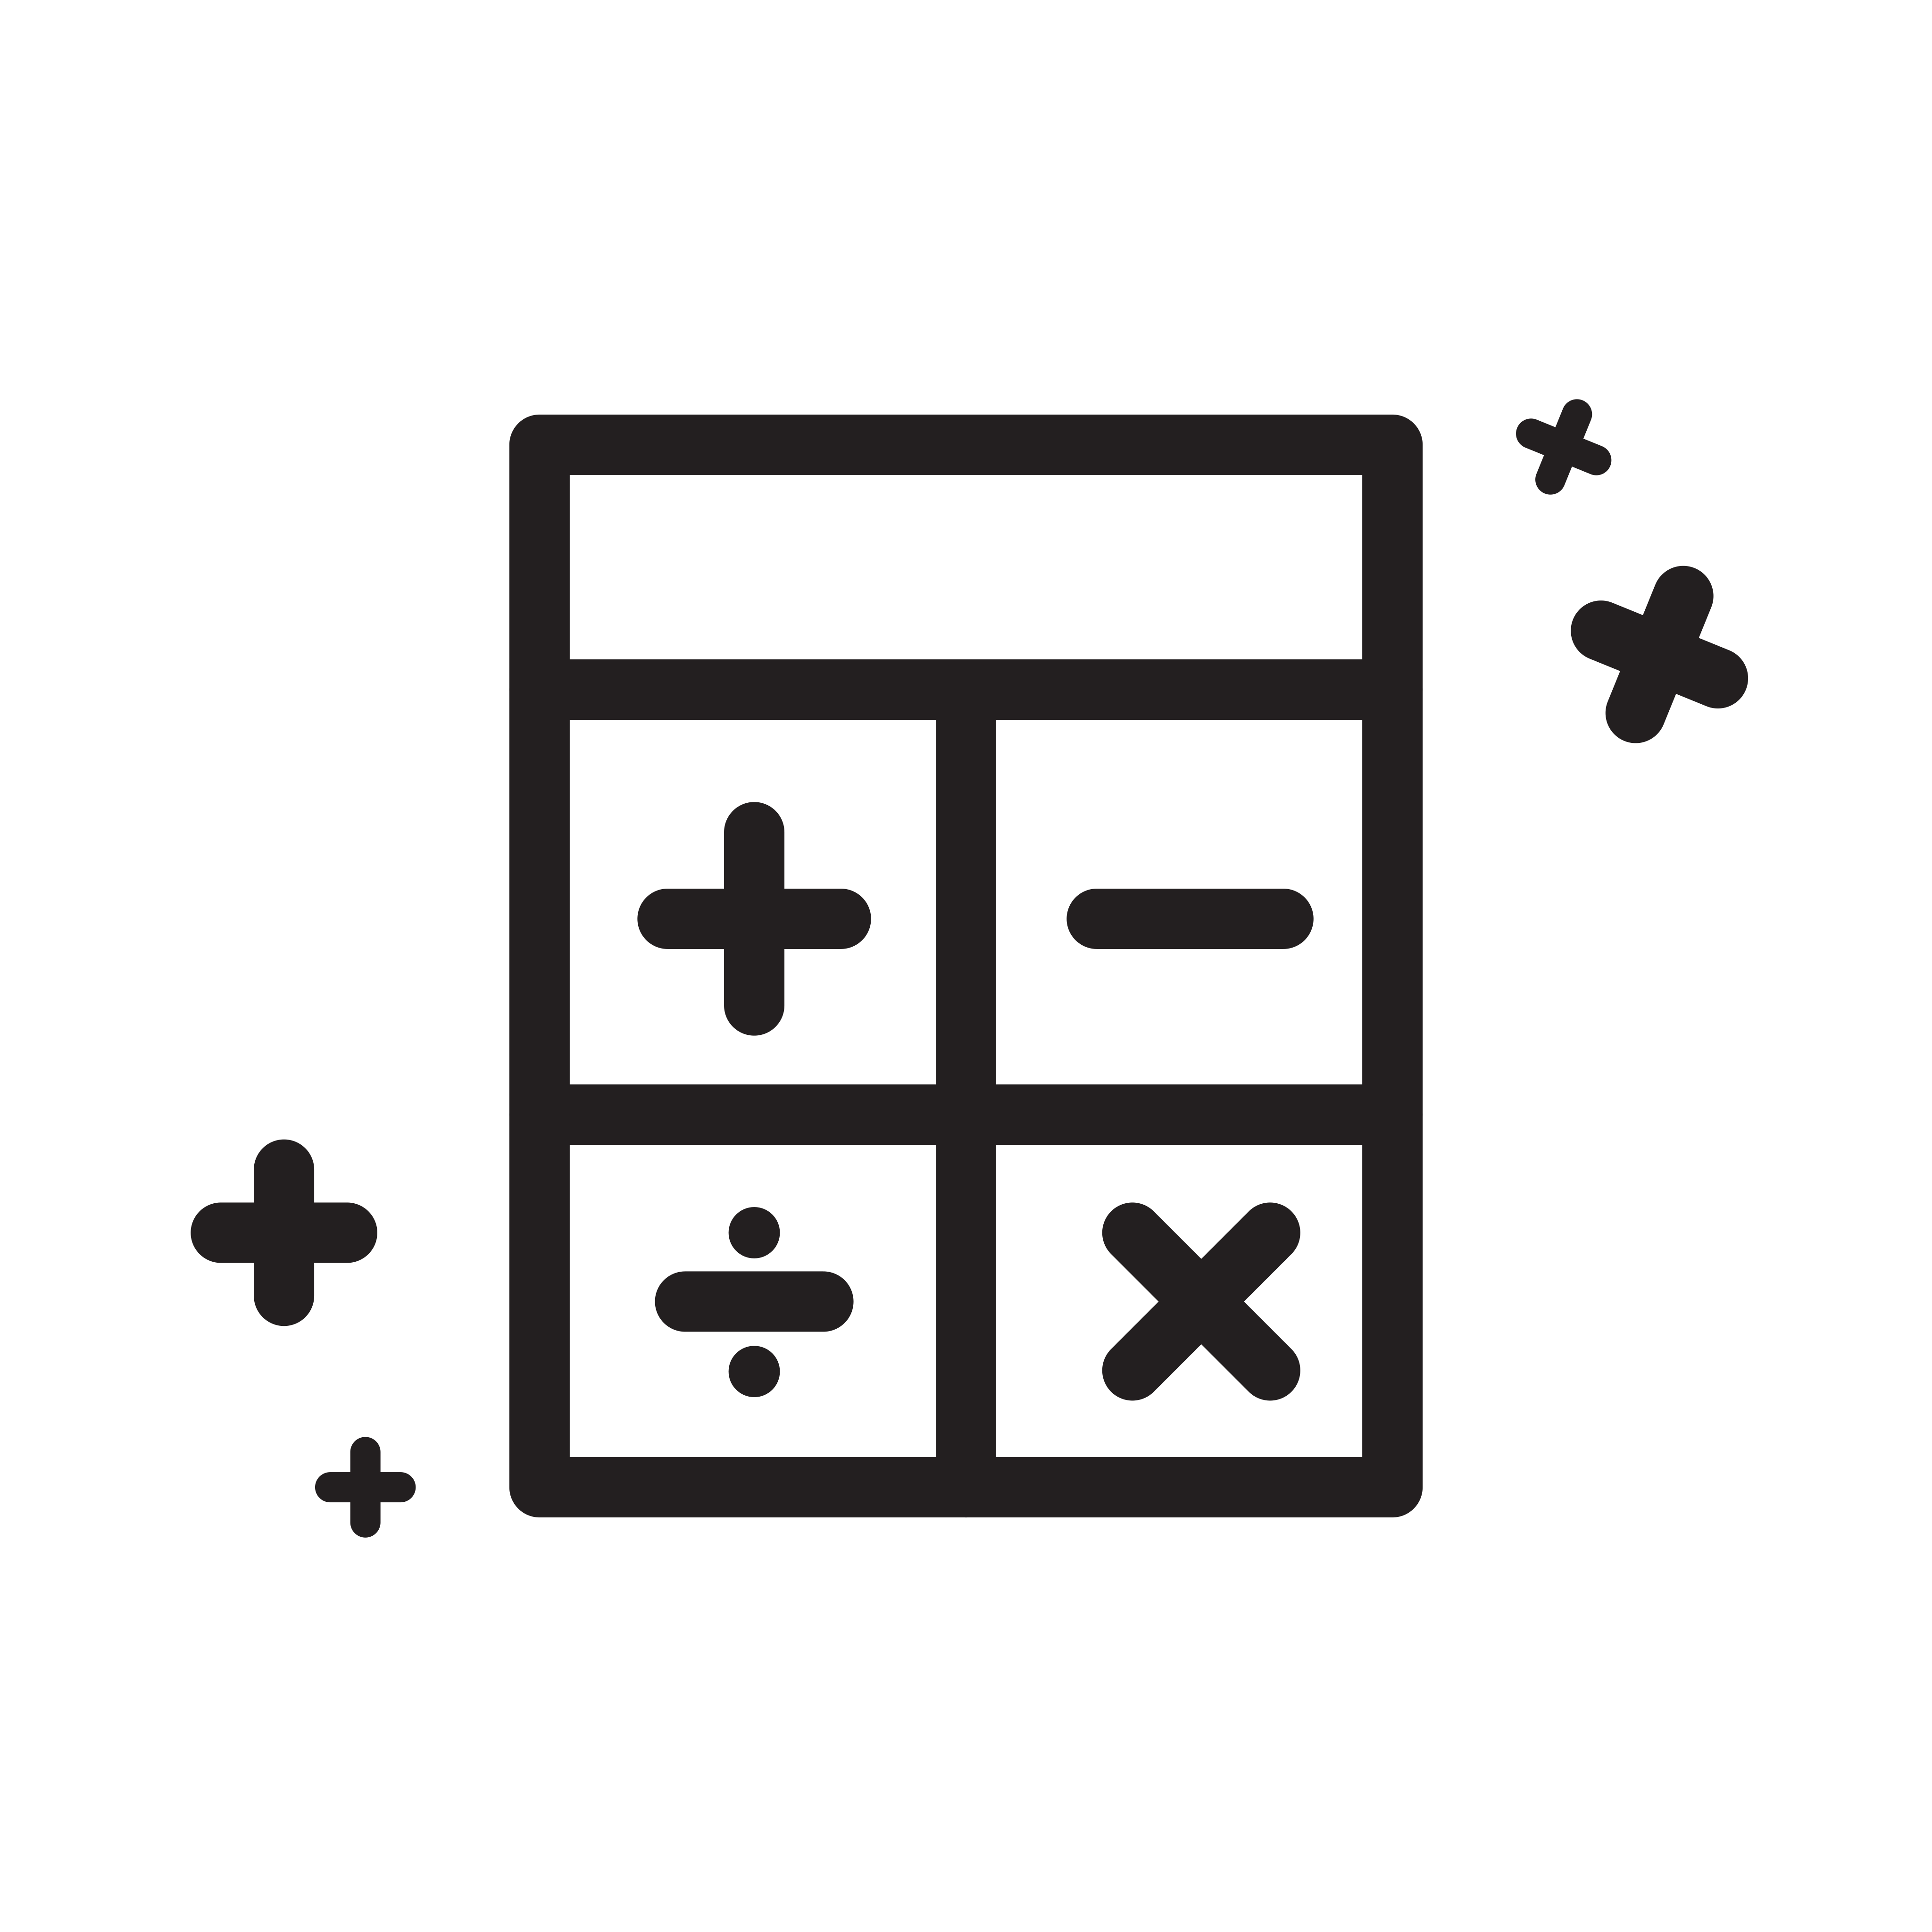 4213589_calculate_calculator_doodle_education_line_icon.png - 152.64 kB